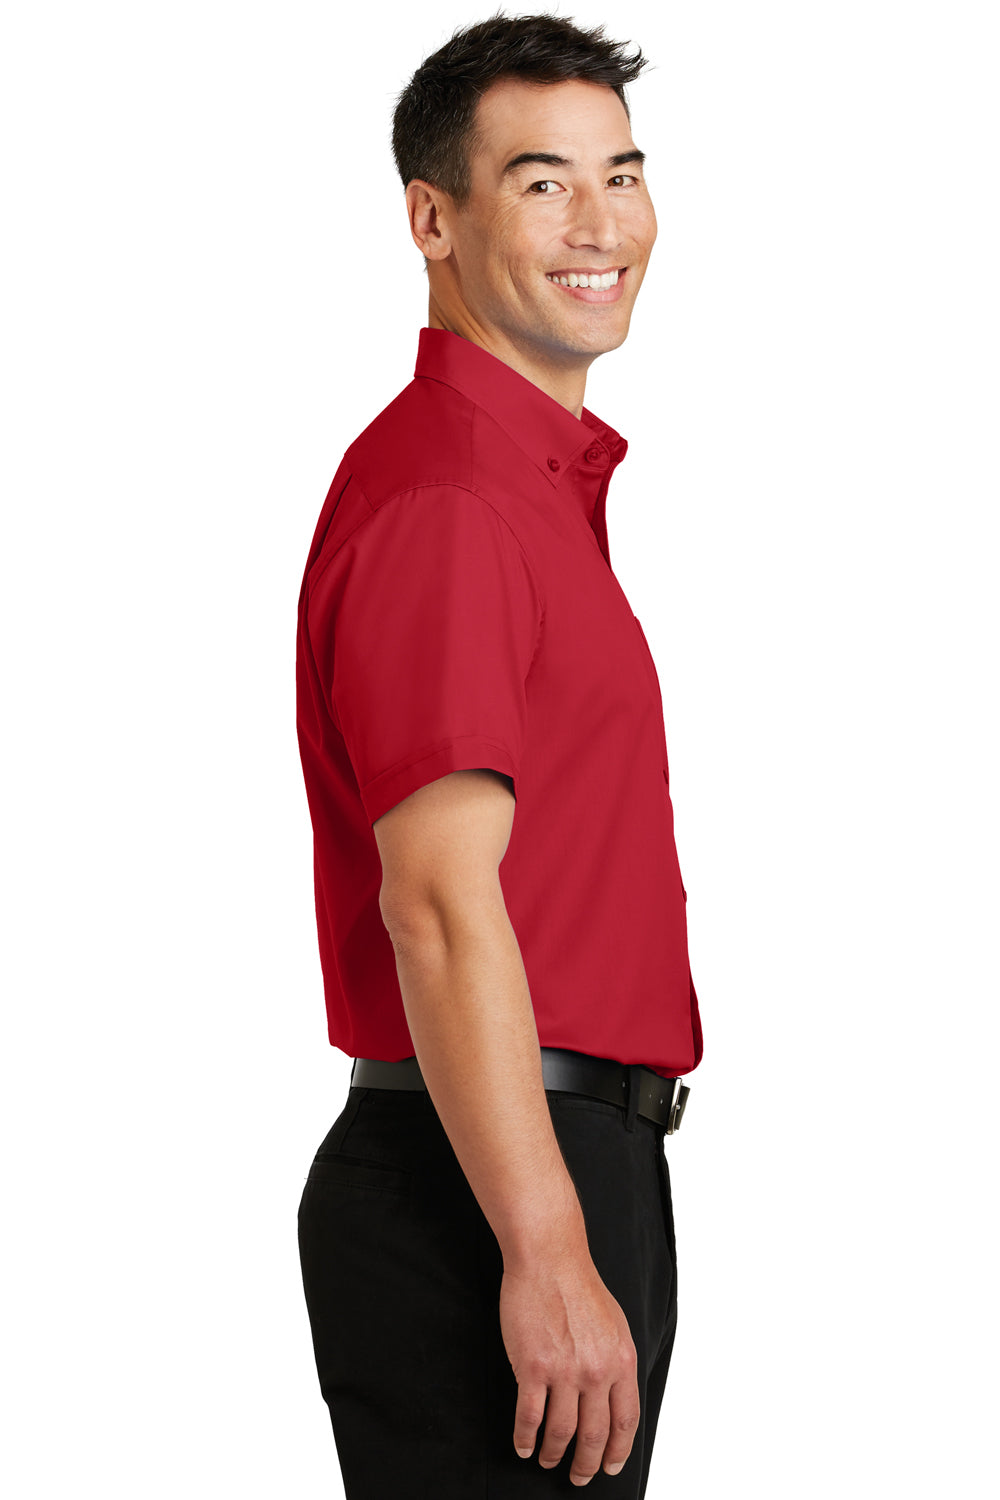 Port Authority S664 Mens SuperPro Wrinkle Resistant Short Sleeve Button Down Shirt w/ Pocket Red Side